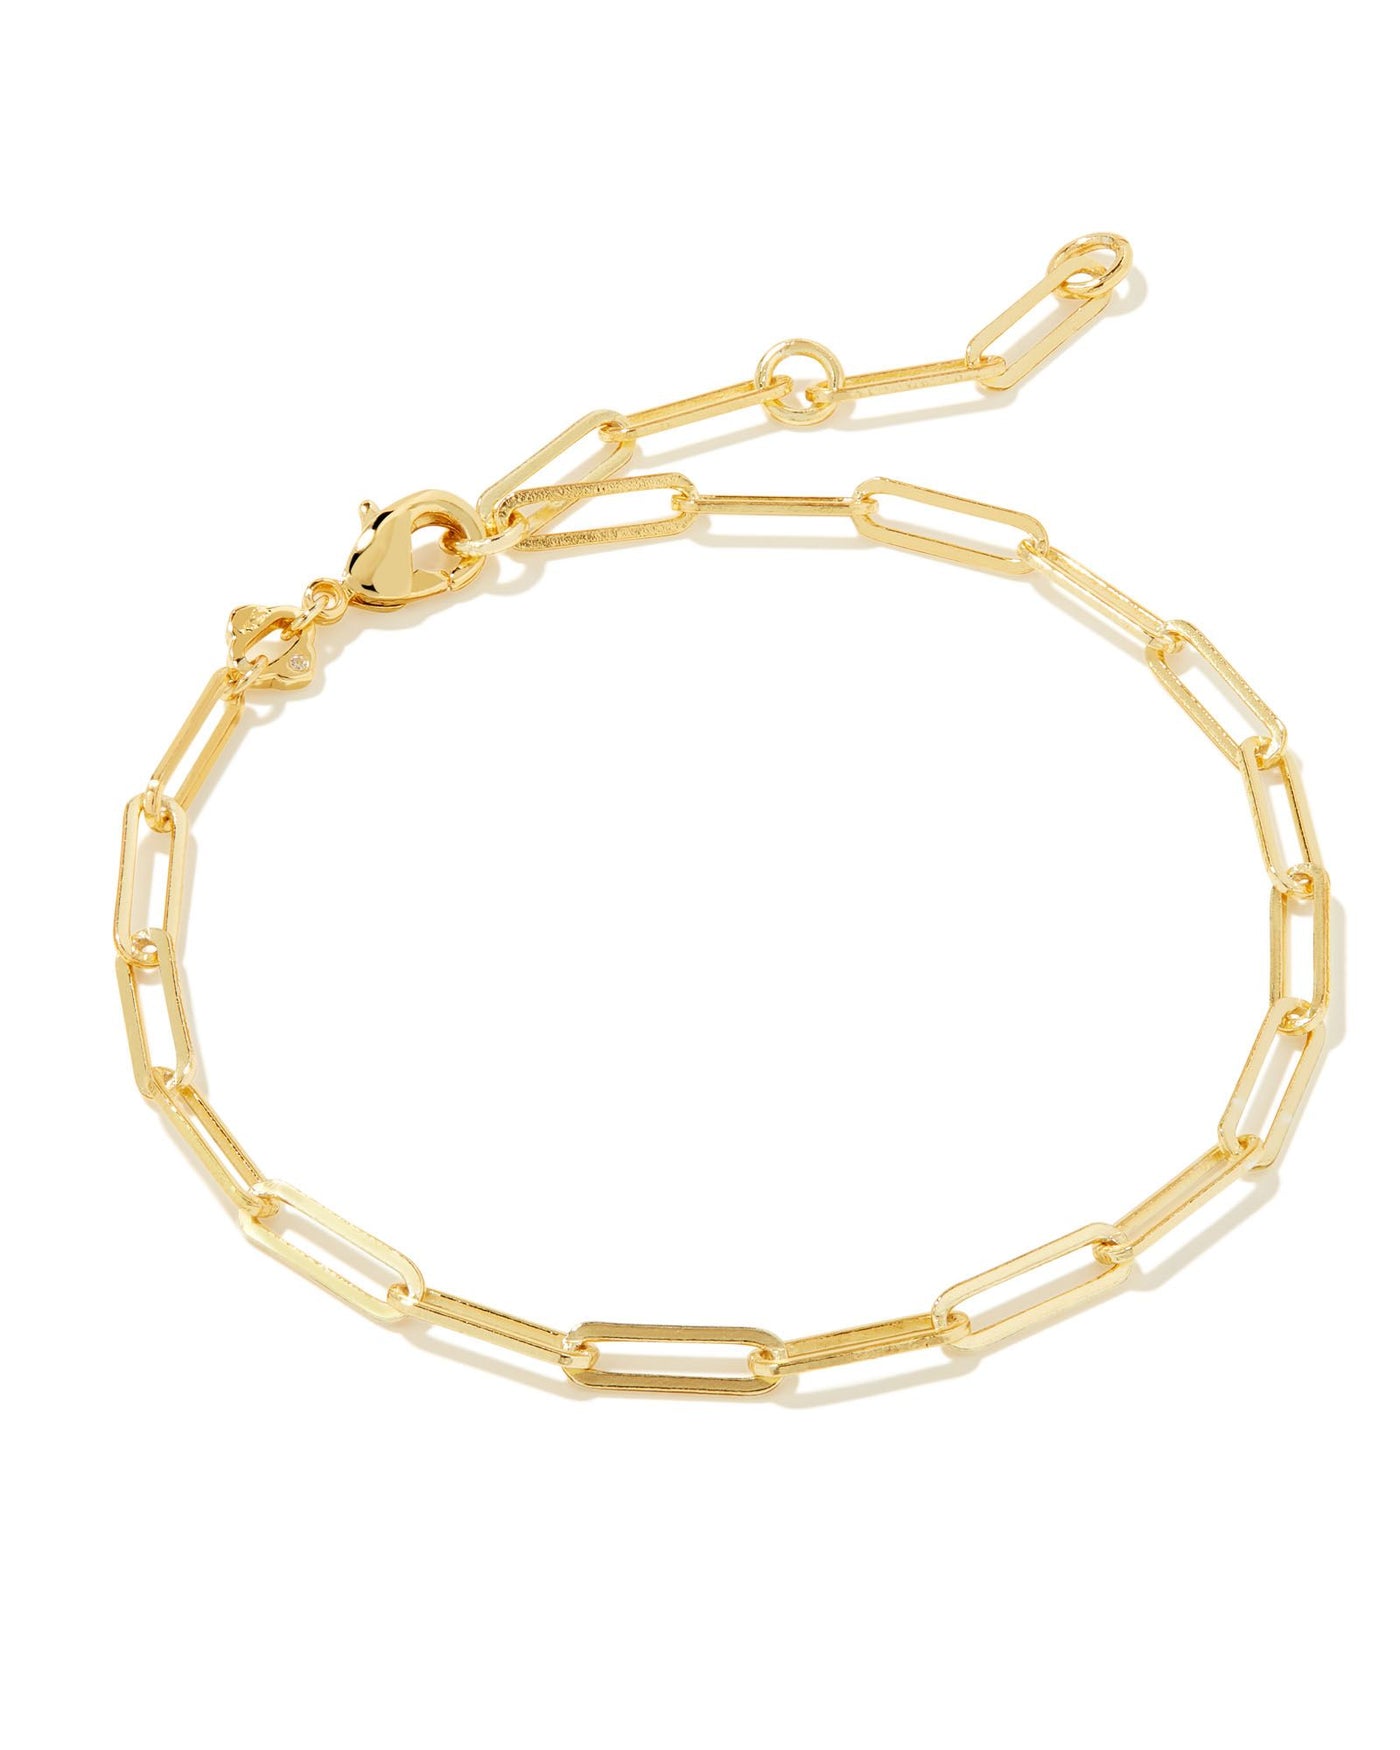 Kendra Scott Courtney Paperclip Bracelet-Bracelets-Kendra Scott-Market Street Nest, Fashionable Clothing, Shoes and Home Décor Located in Mabank, TX